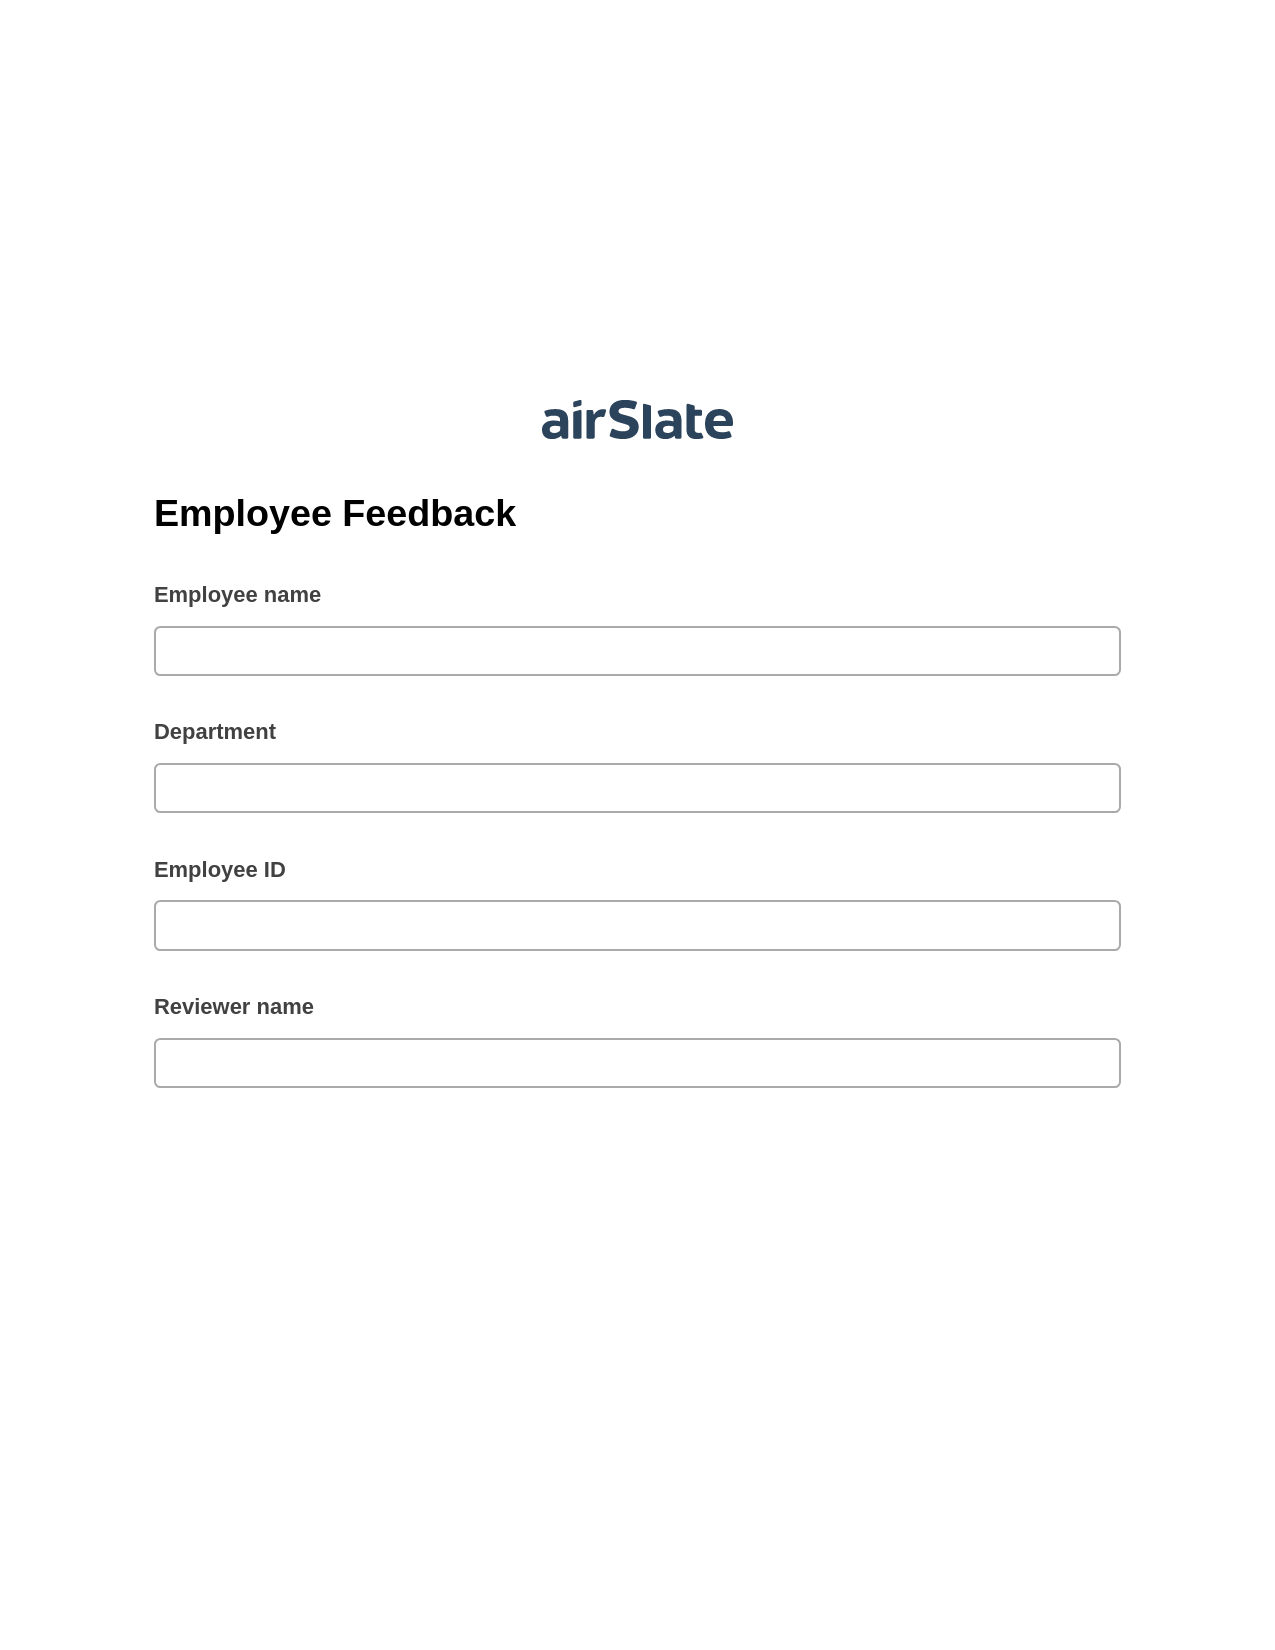 Employee Feedback Pre-fill from CSV File Dropdown Options Bot, Reminder Bot, Email Notification Postfinish Bot